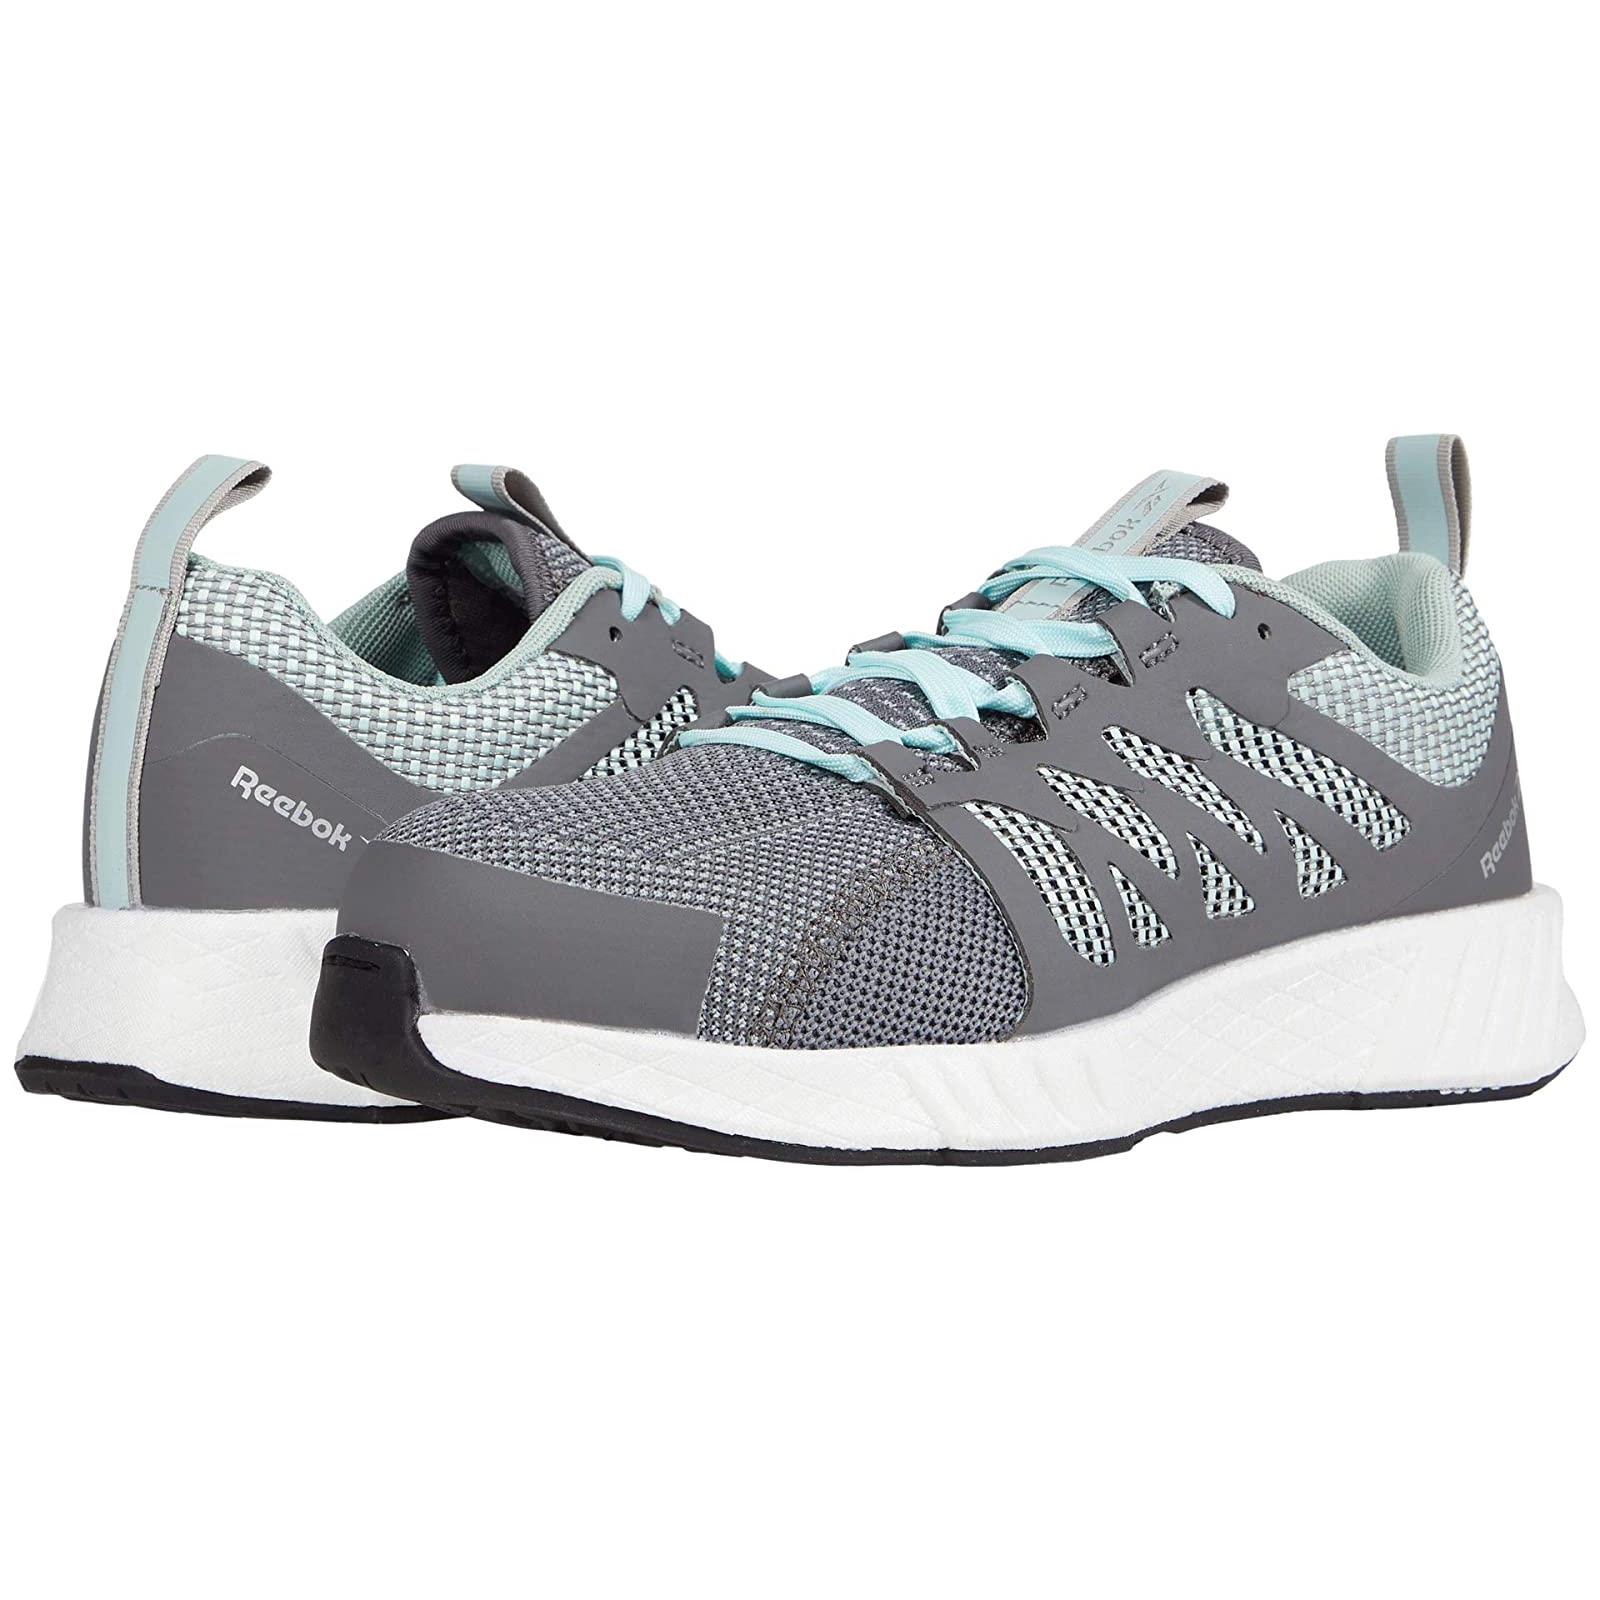 Woman`s Shoes Reebok Work Fusion Flexweave Cage Composite Toe Grey